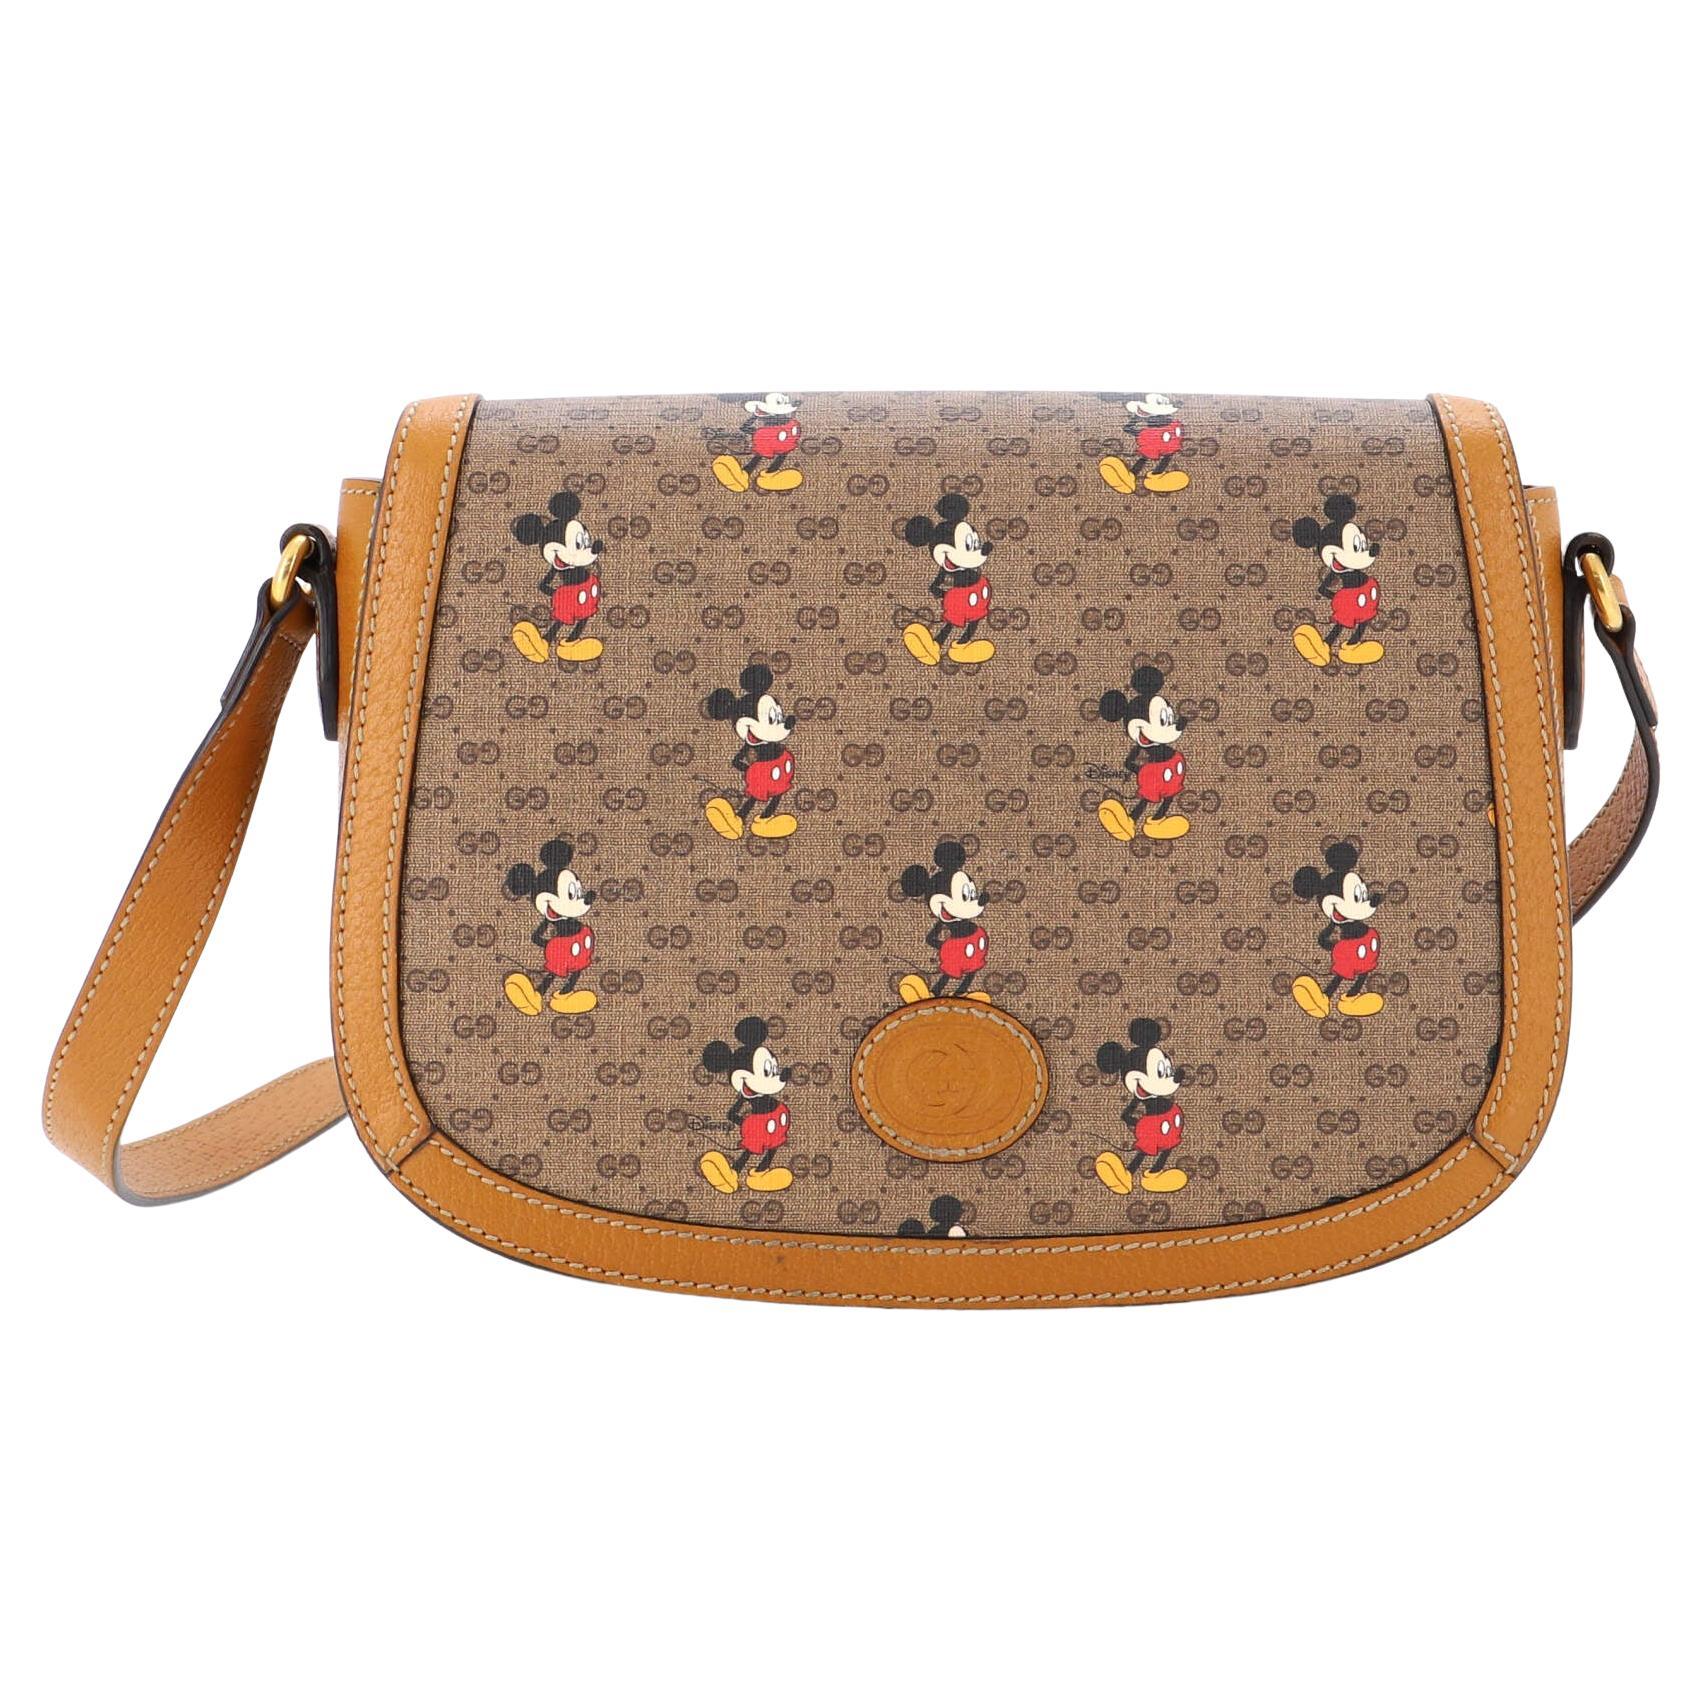 Gucci x Disney Mickey Mouse Print Canvas Leather Bucket Shoulder